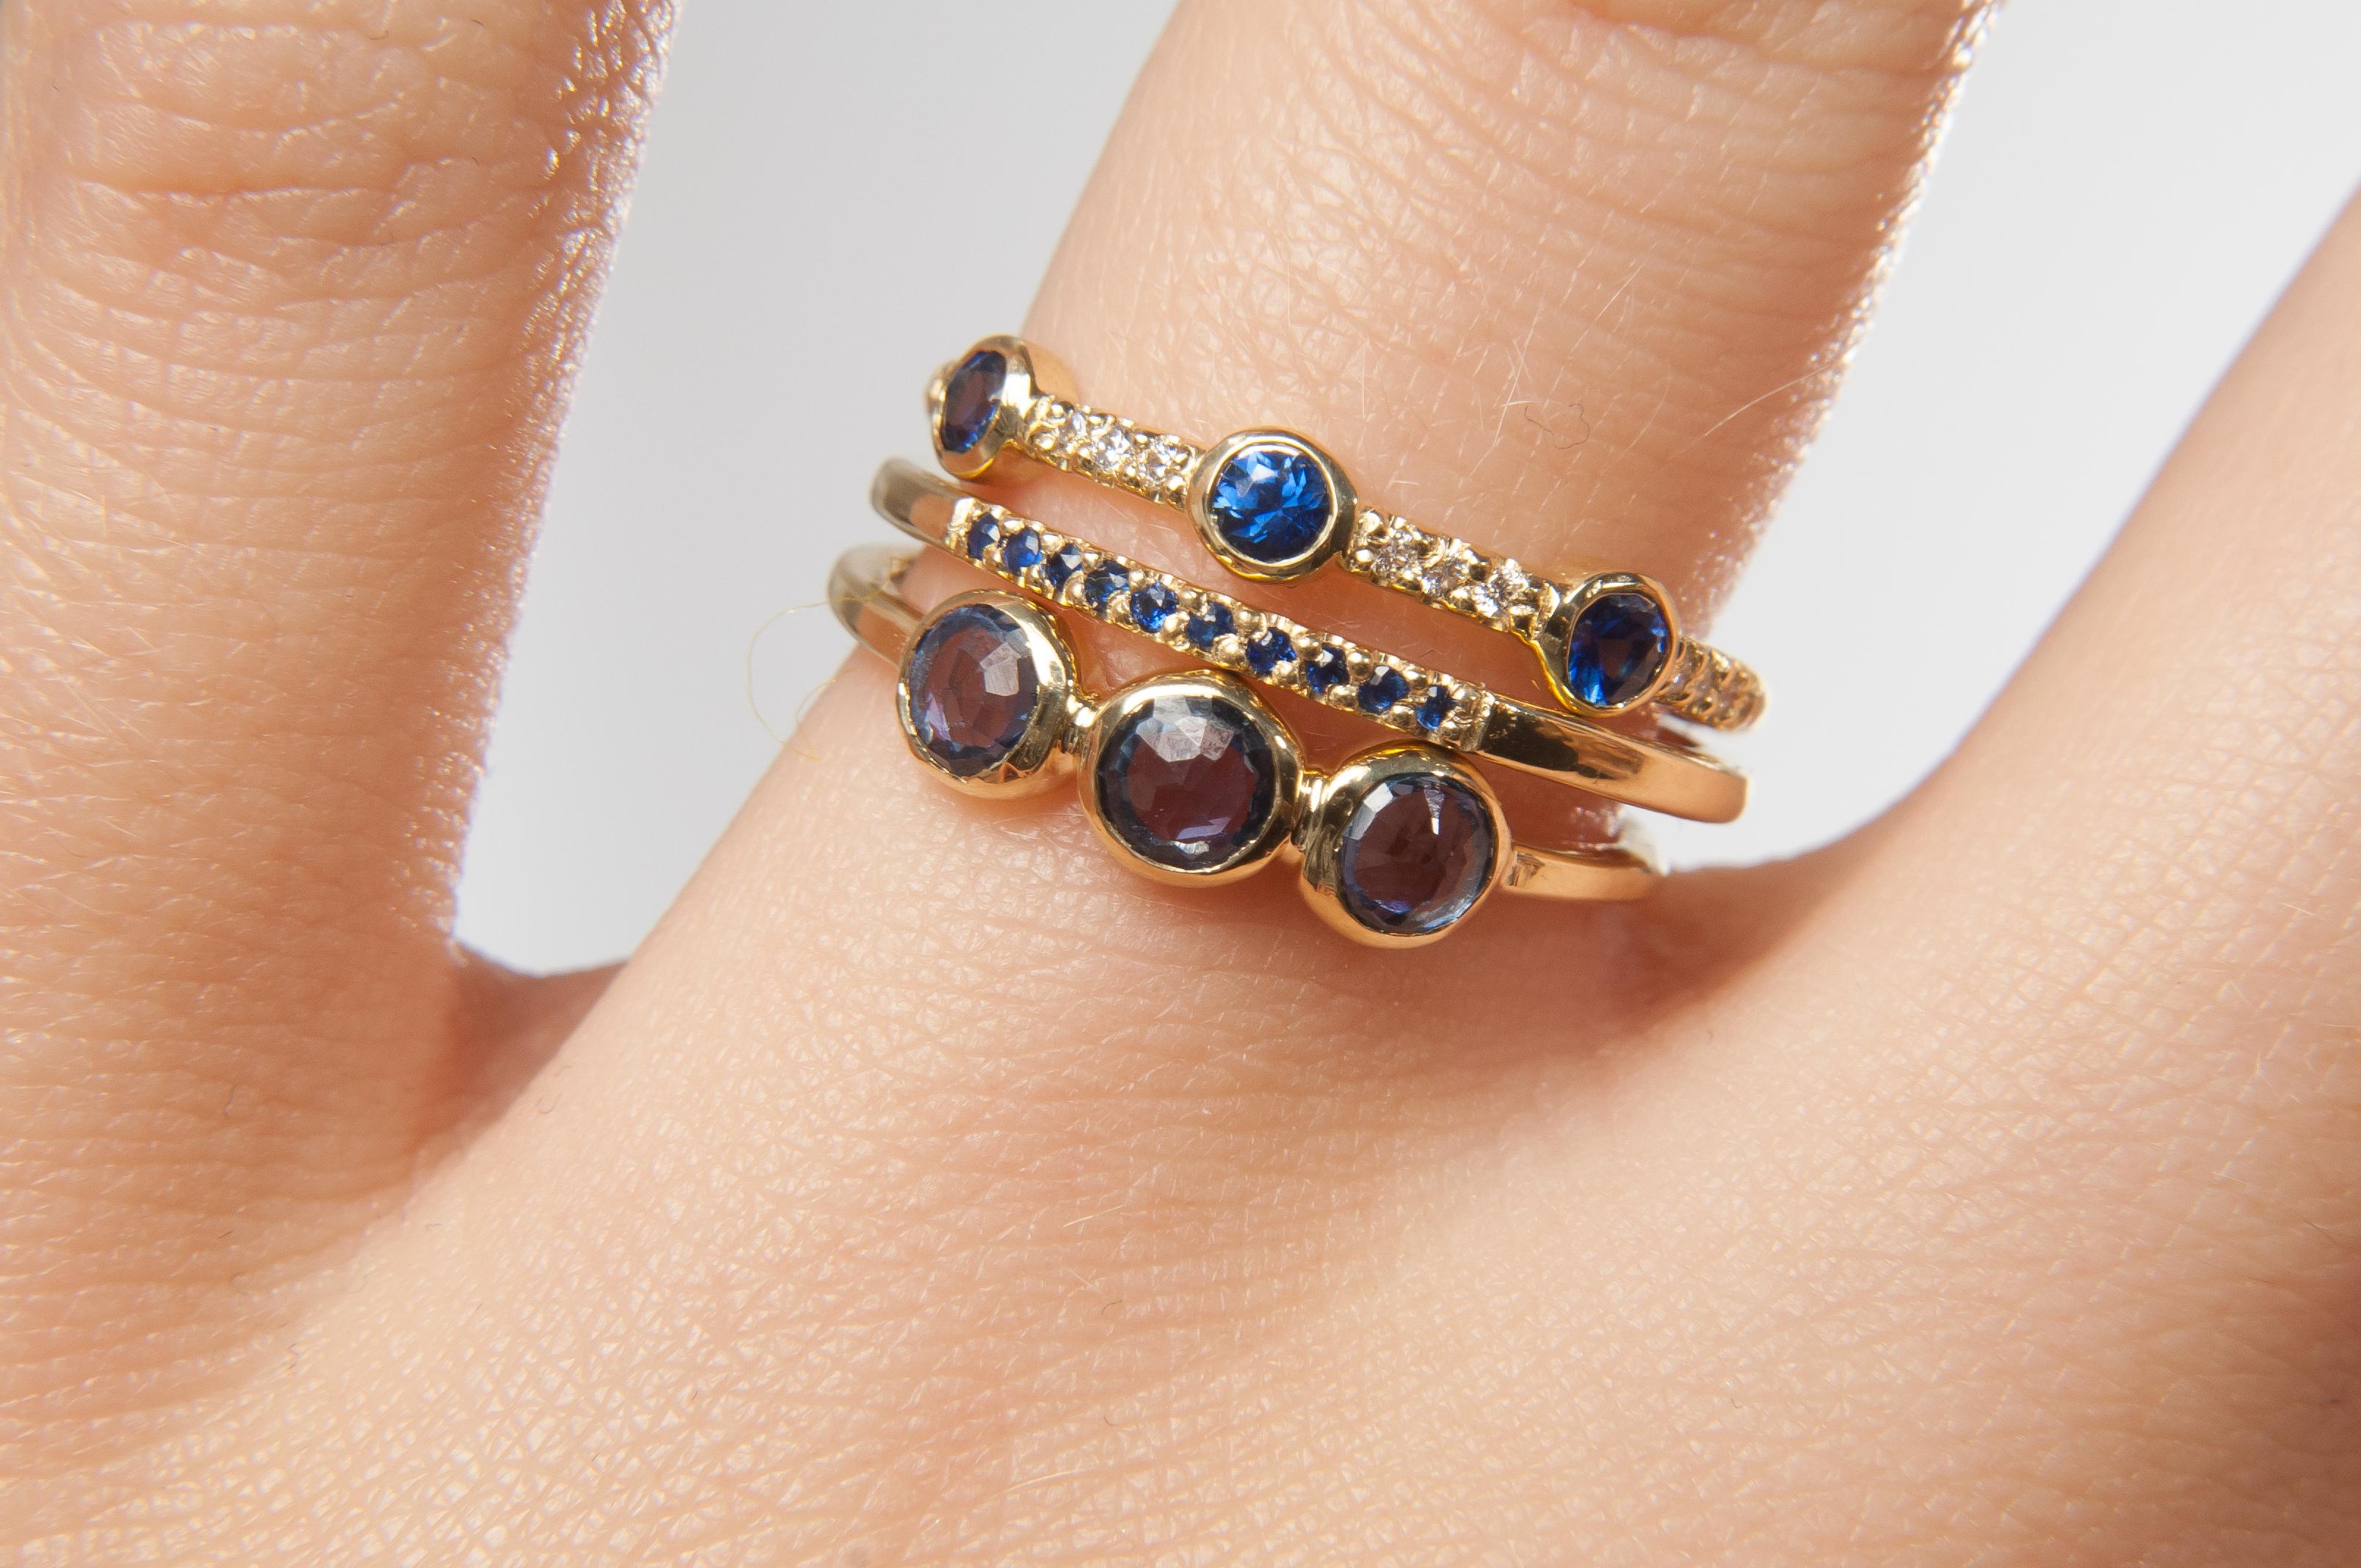 Update your look with this modern take on a classic three stone ring.

18K yellow gold band set with three bezel set 0.12” blue sapphires.

Size 6